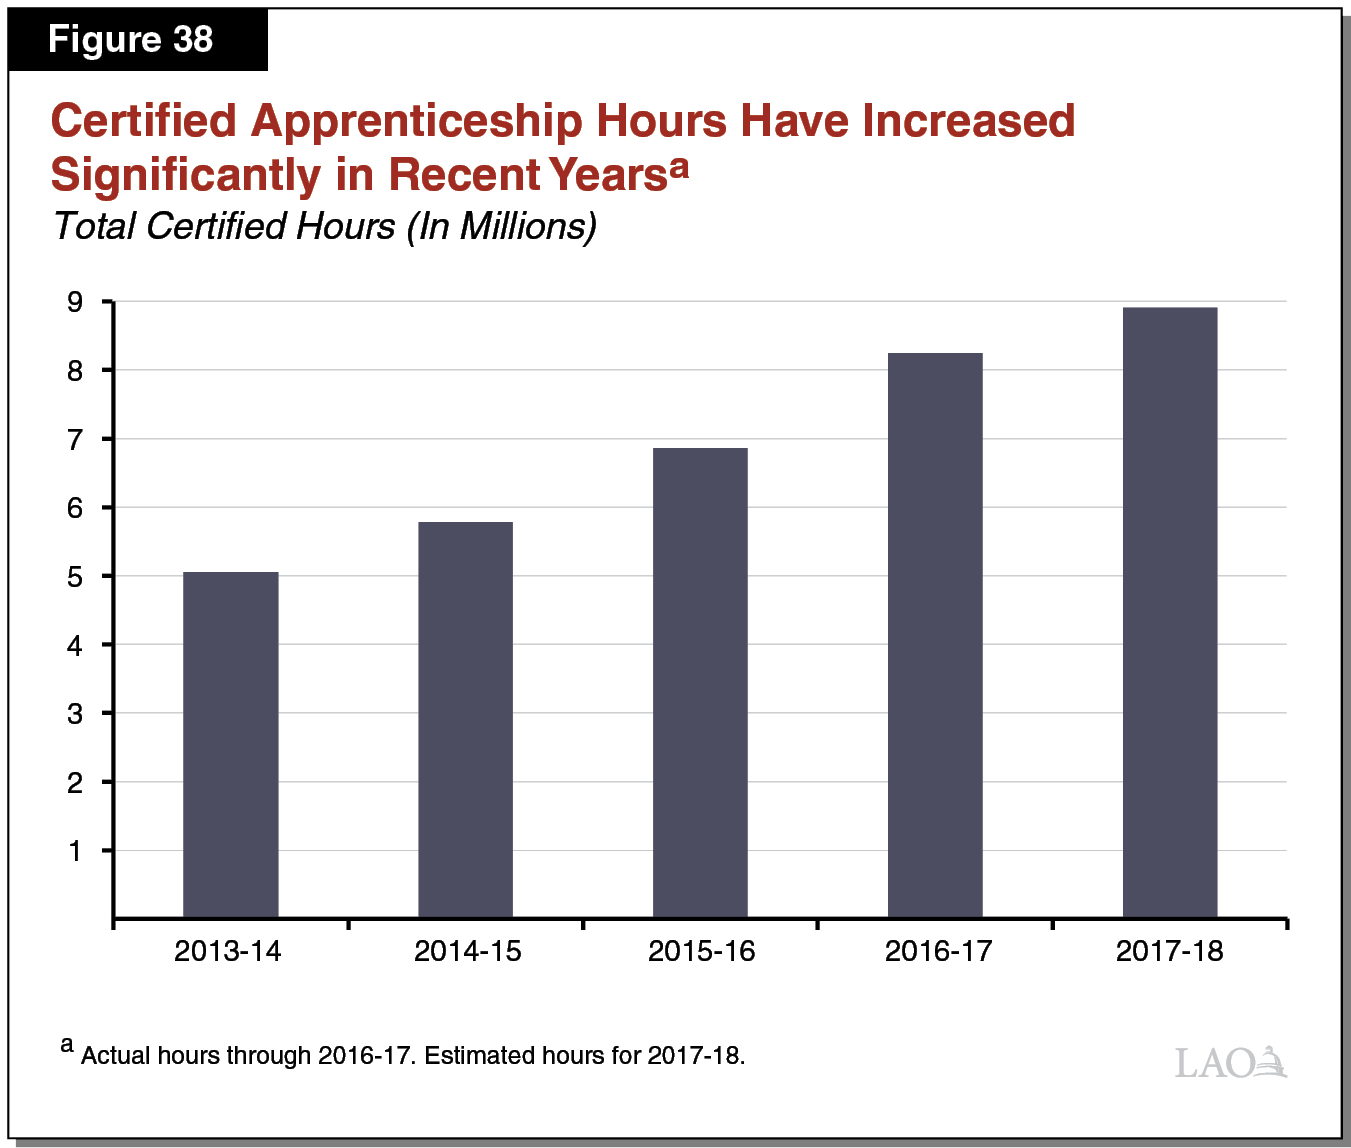 Figure 38 - Certified Apprenticeship Hours Have Increased Significantly in Recent Years